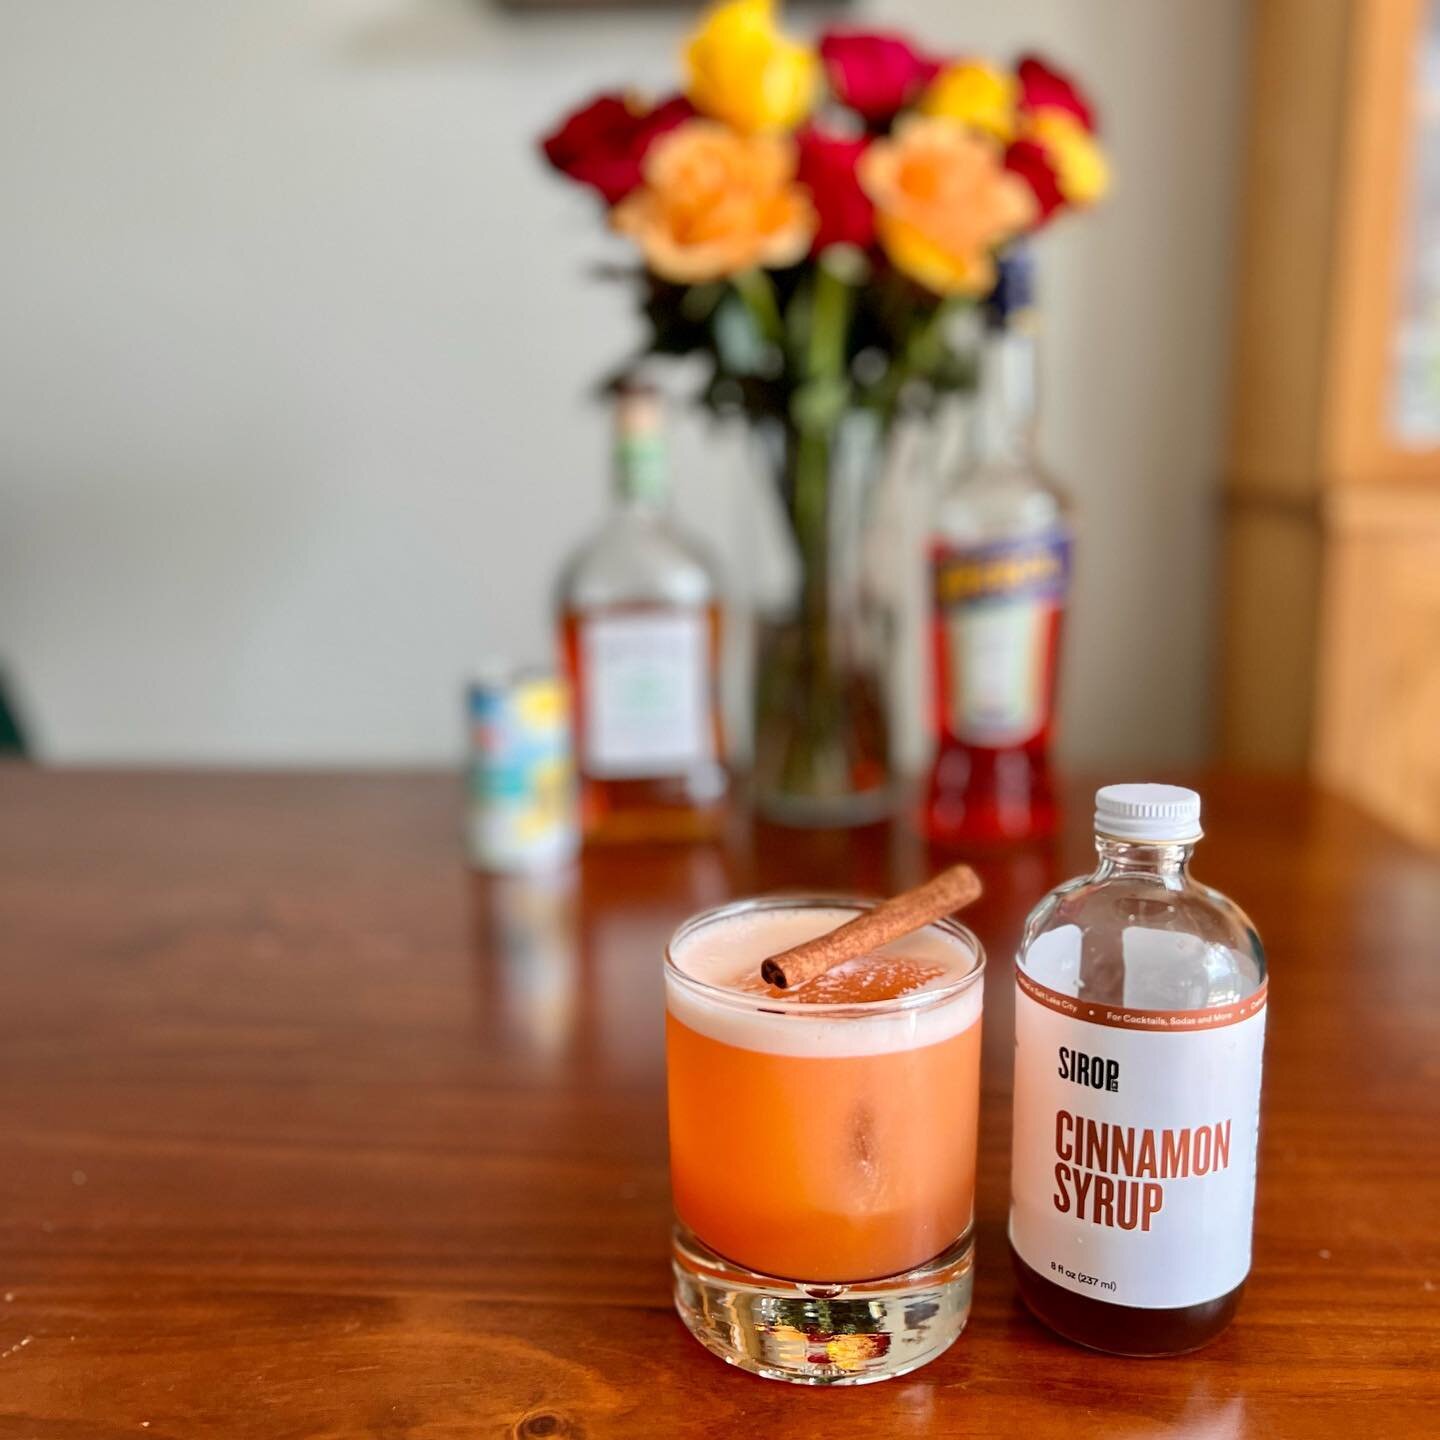 One of our favorite spins on a classic:

BIRD OF PARADISE
1oz @appletonestate dark rum
1oz @aperolusa Aperol
1oz pineapple juice
&frac12; oz @sirop_co cinnamon syrup
&frac12; oz fresh lime juice

Shake all ingredients with ice. Strain into a glass wi